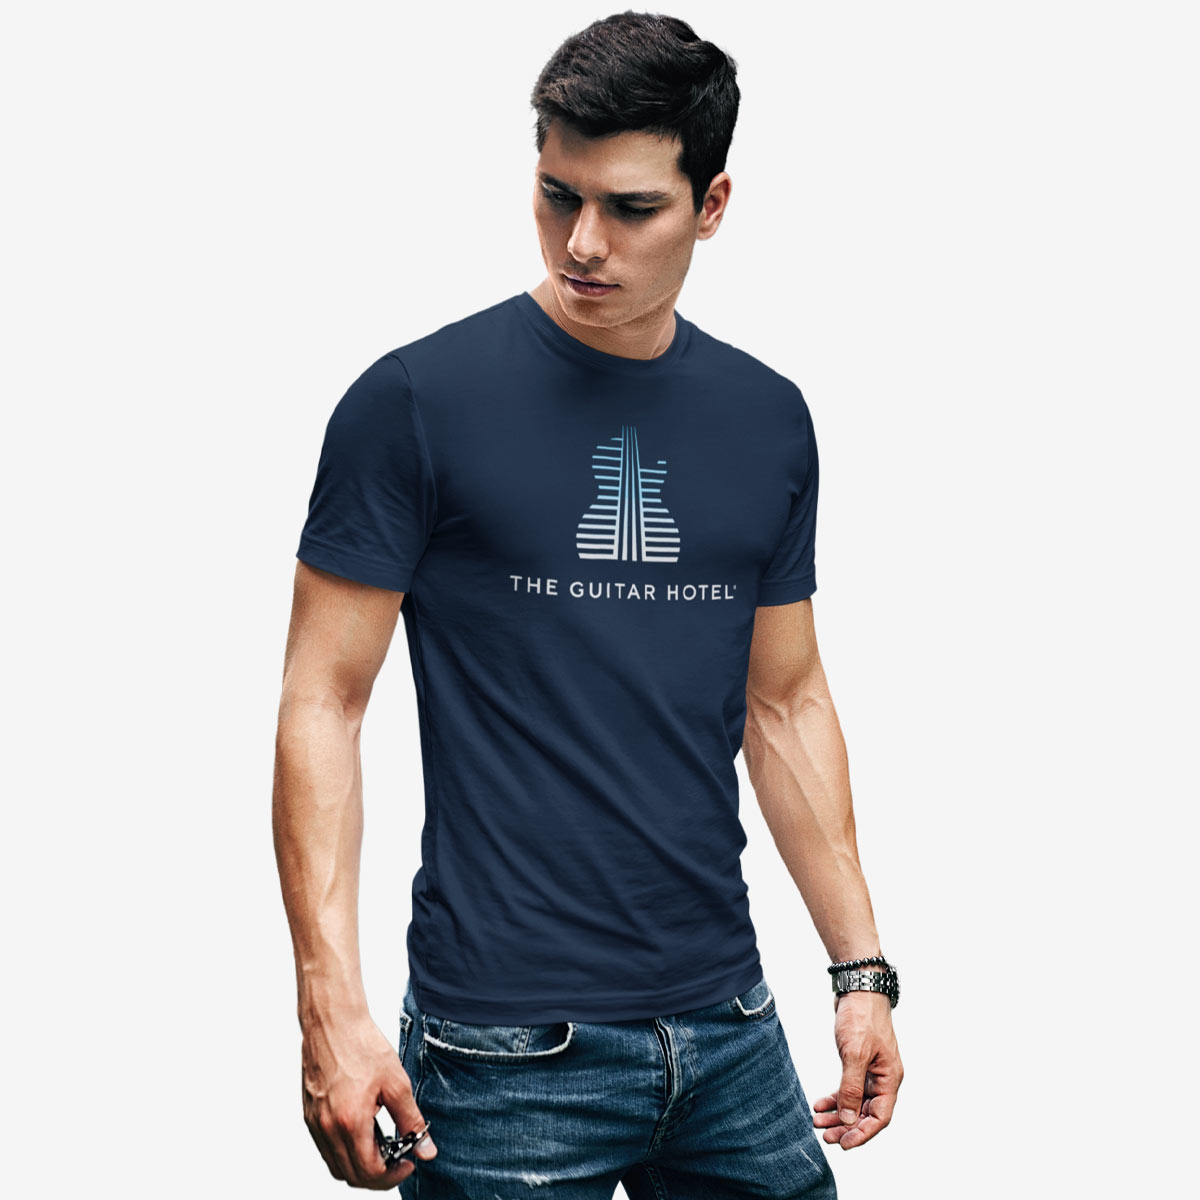 Guitar Hotel Adult Fit Tee in Navy with Gradient Guitar Design image number 1